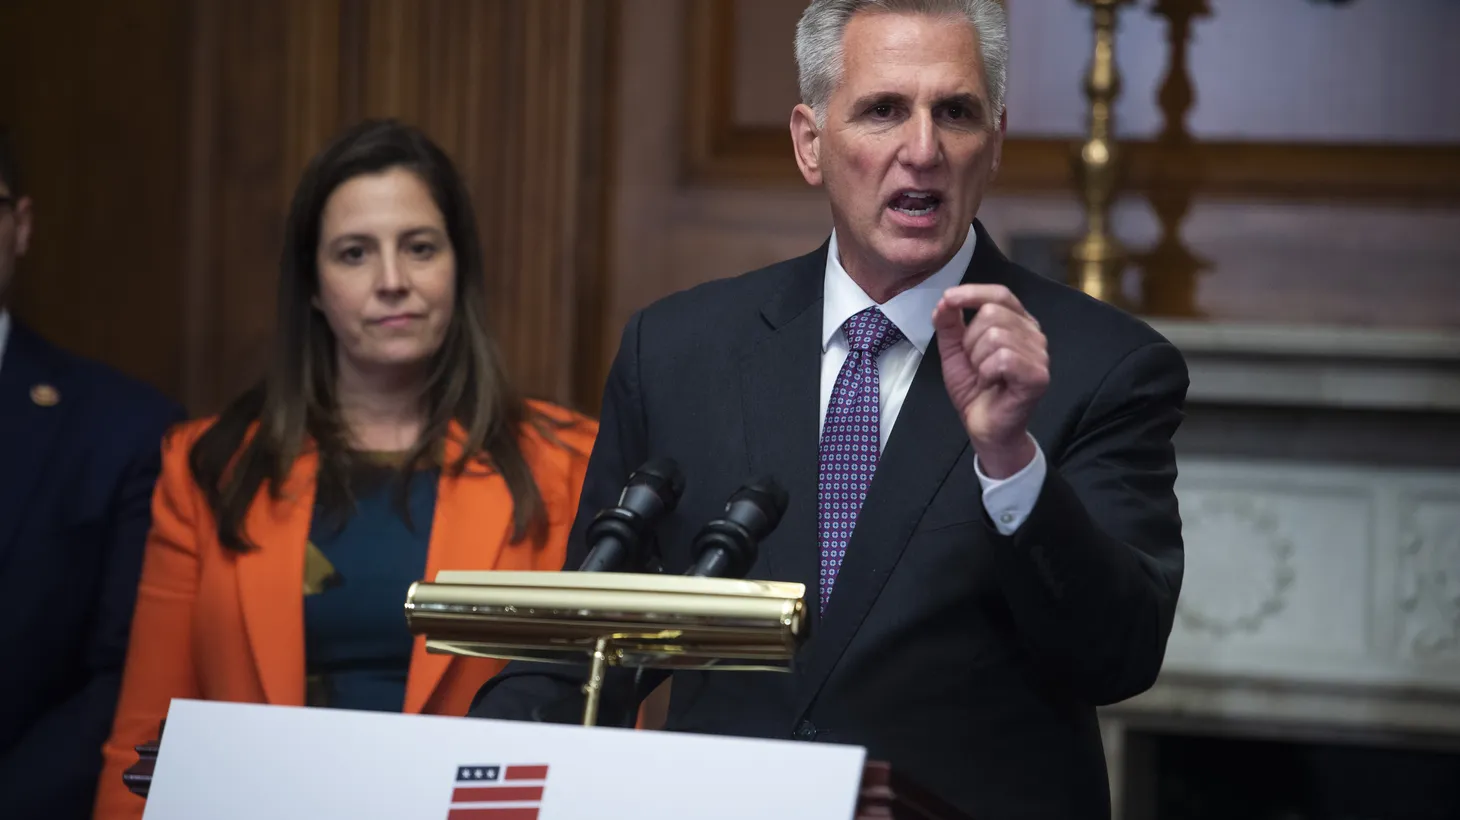 Speaker of the United States House of Representatives Kevin McCarthy (Republican of California) offers remarks following passage of H.R. 3746, the Bipartisan Budget Agreement, at the US Capitol in Washington, DC, Wednesday, May 31, 2023.